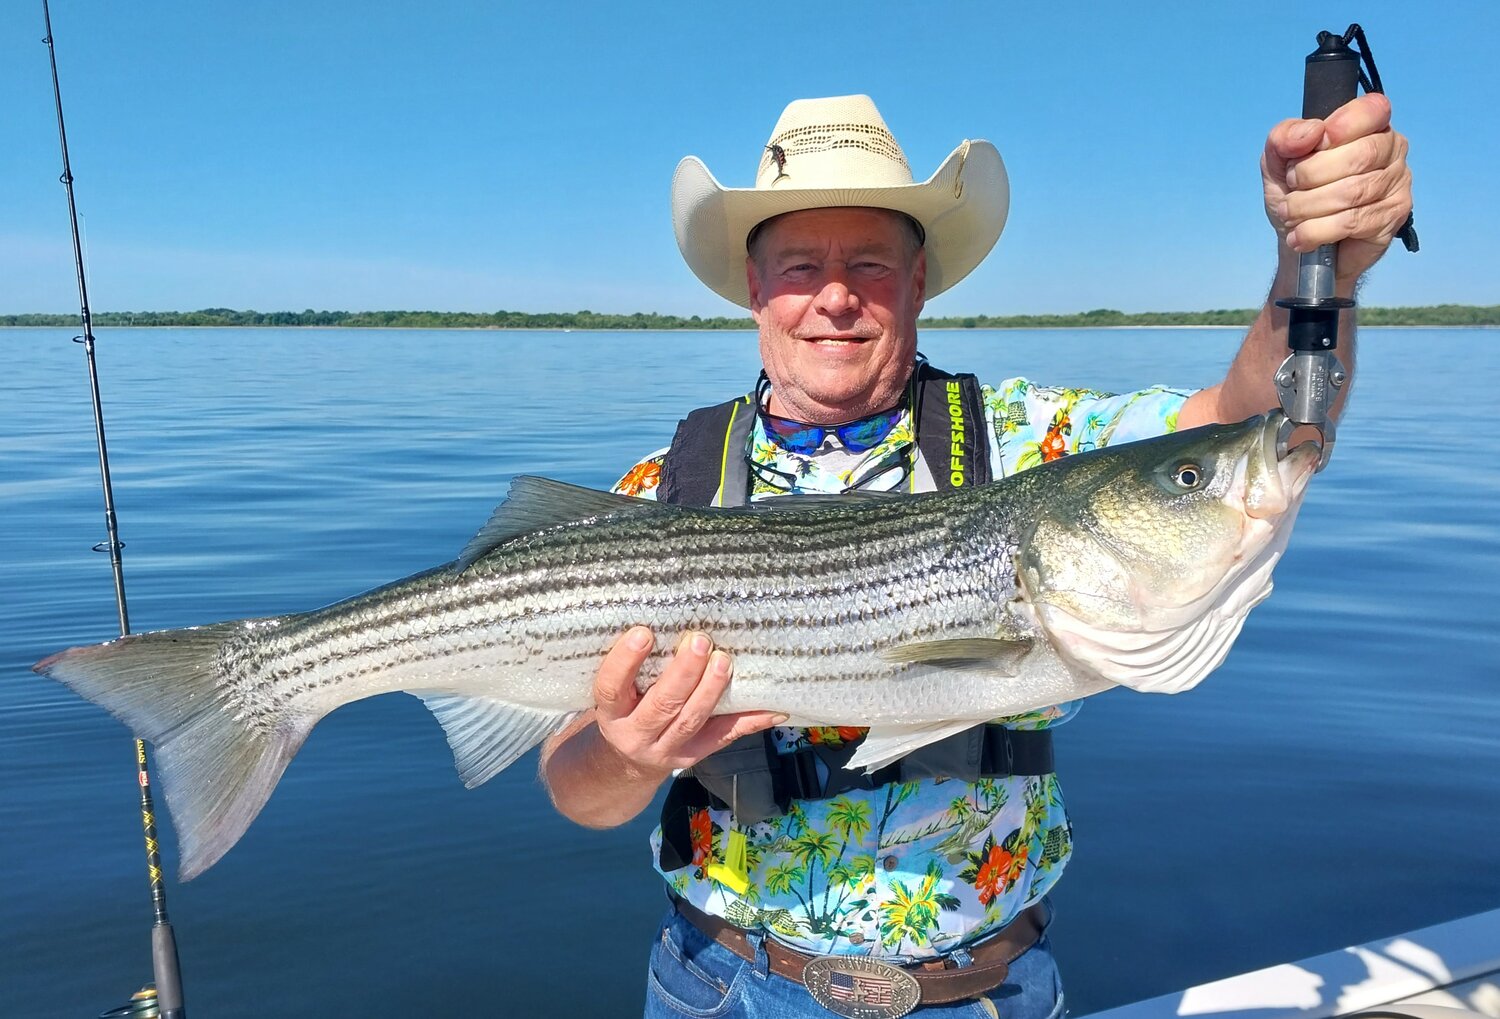 Tim Rounds, of Idaho, here on vacation, caught this 38” striped bass (his first ever) fishing with light tackle at Popasquash Point, Bristol on No Fluke Fishing Charters.